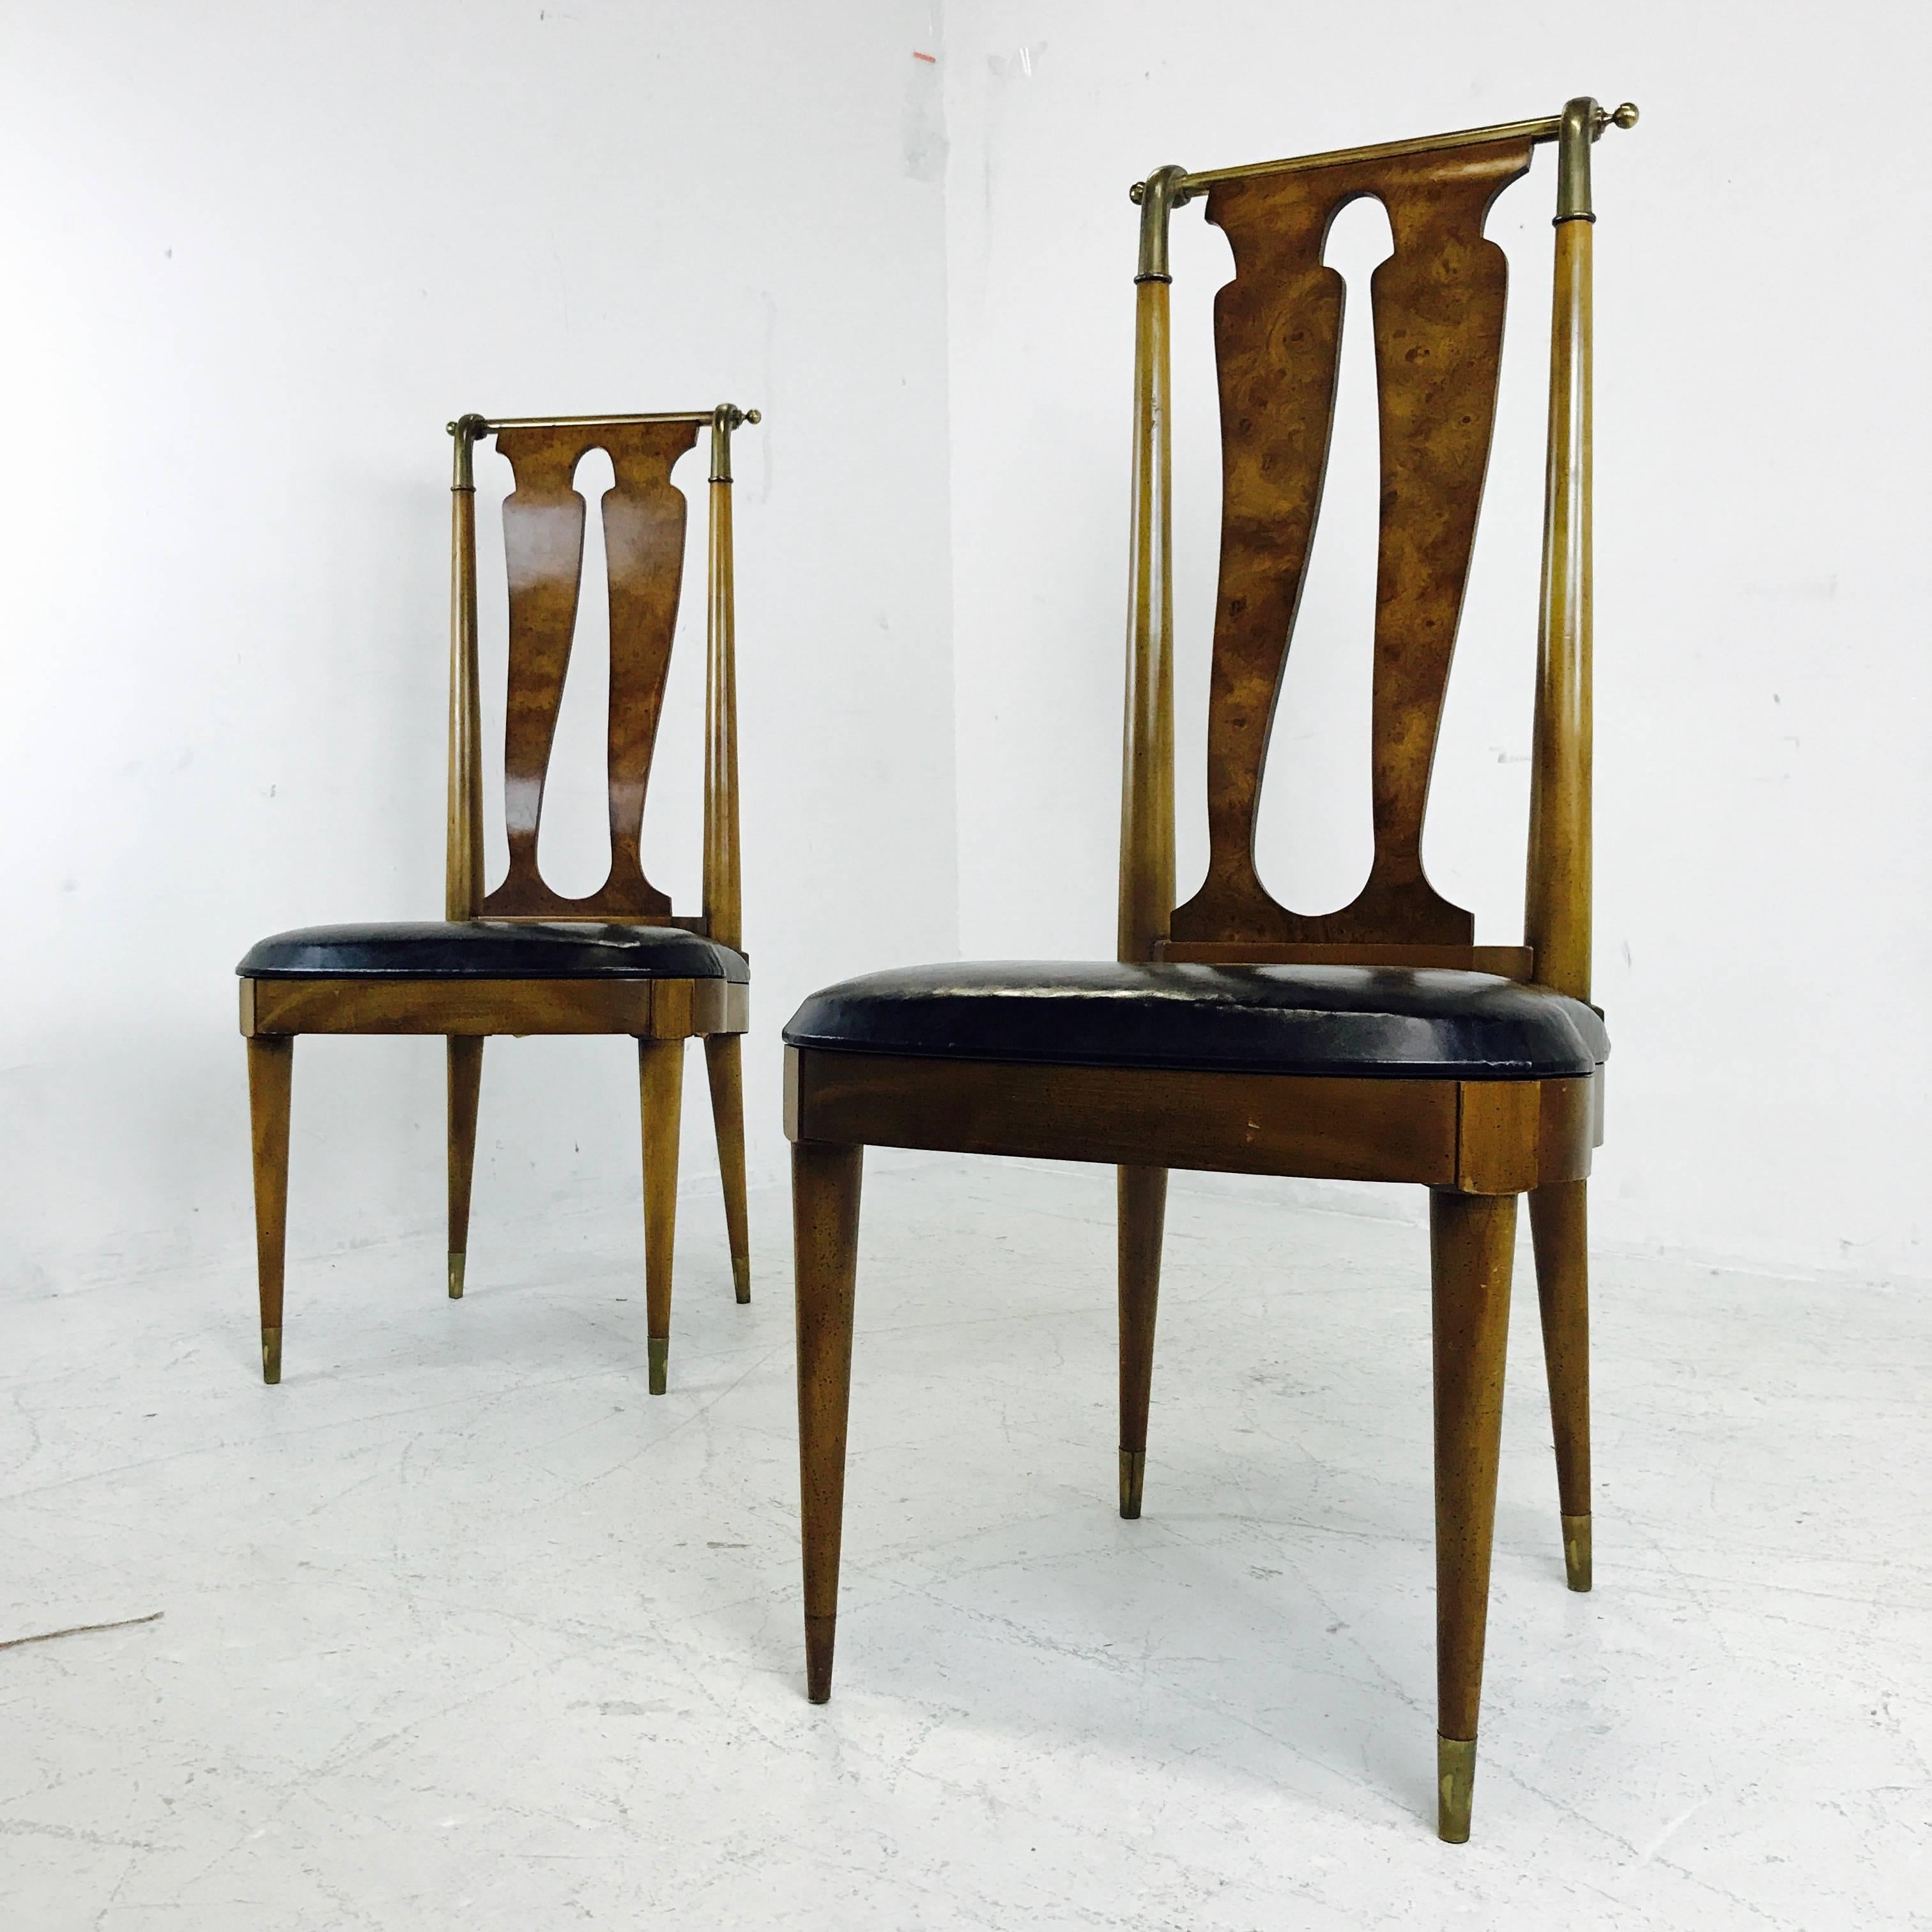 Pair of Italianate burl wood and brass side chairs. The backs of the chairs have a curved form. The brass has an aged patina, circa 1960s

Dimensions: 20" W x 22" D x 45" T
seat height 20".